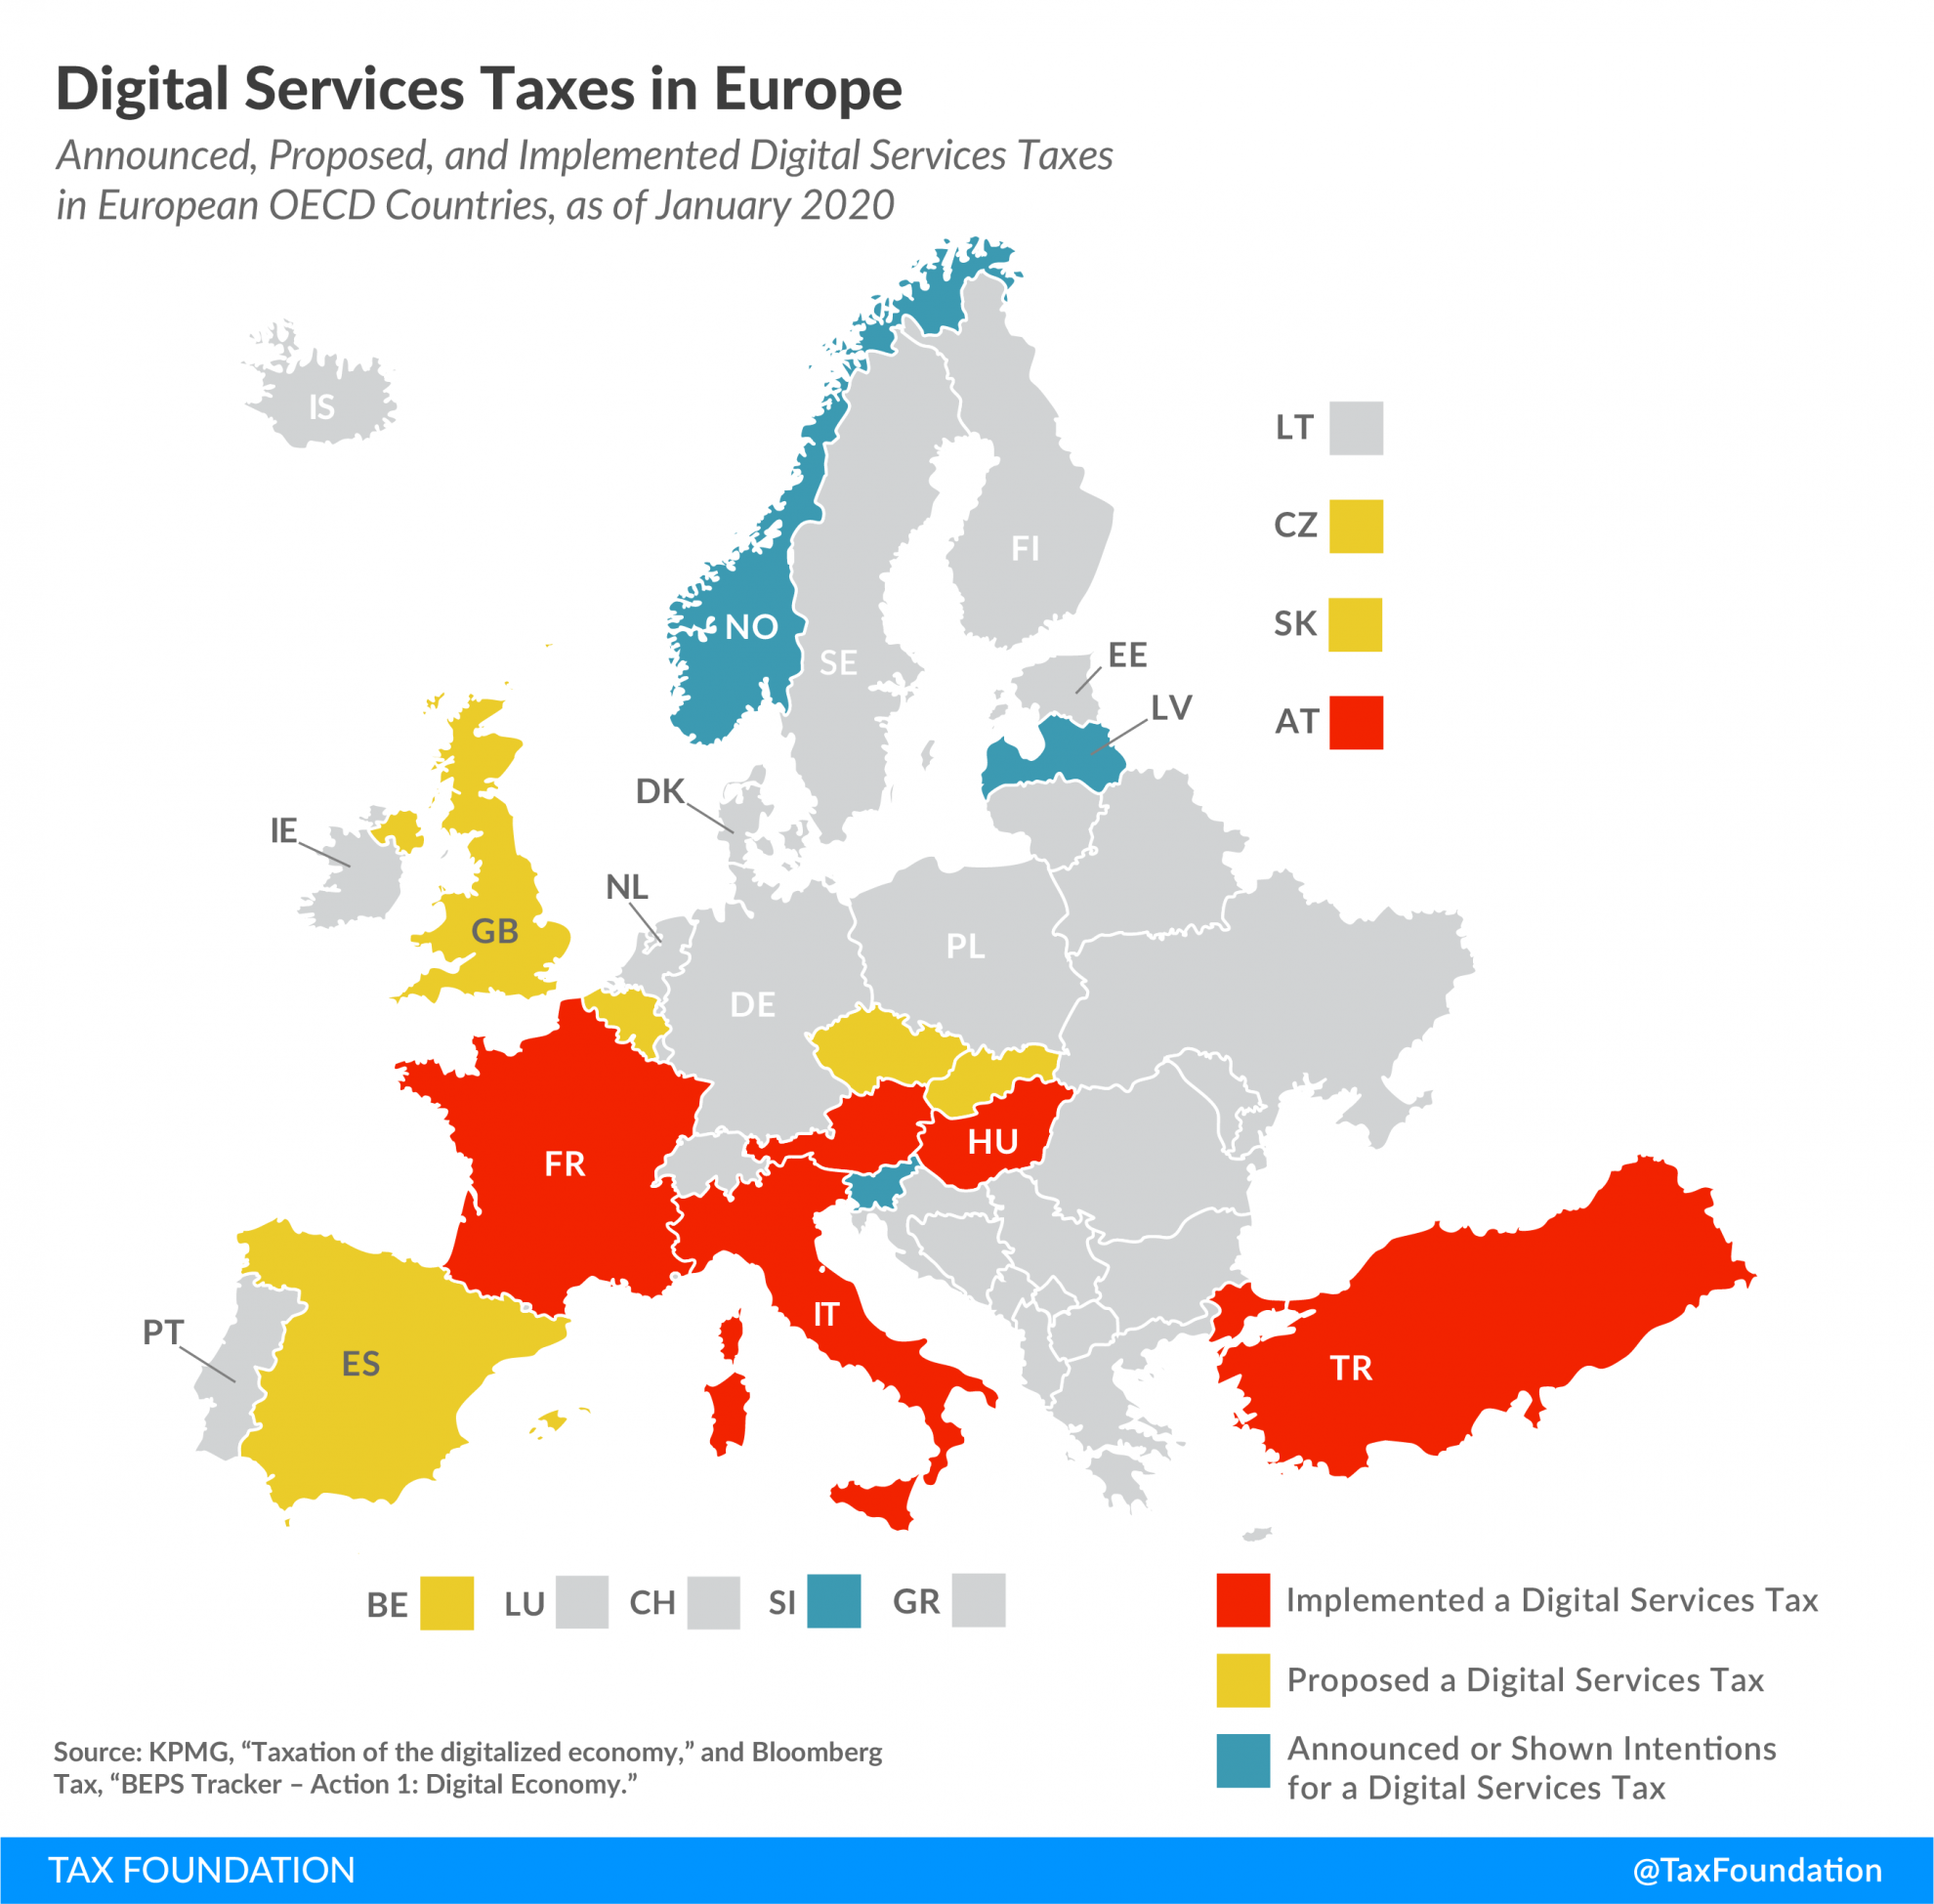 Digital Services Taxes in Europe. Digital taxes in Europe that have been implemented, announced, and proposed. Learn more about digital taxation in Europe, digital economy tax